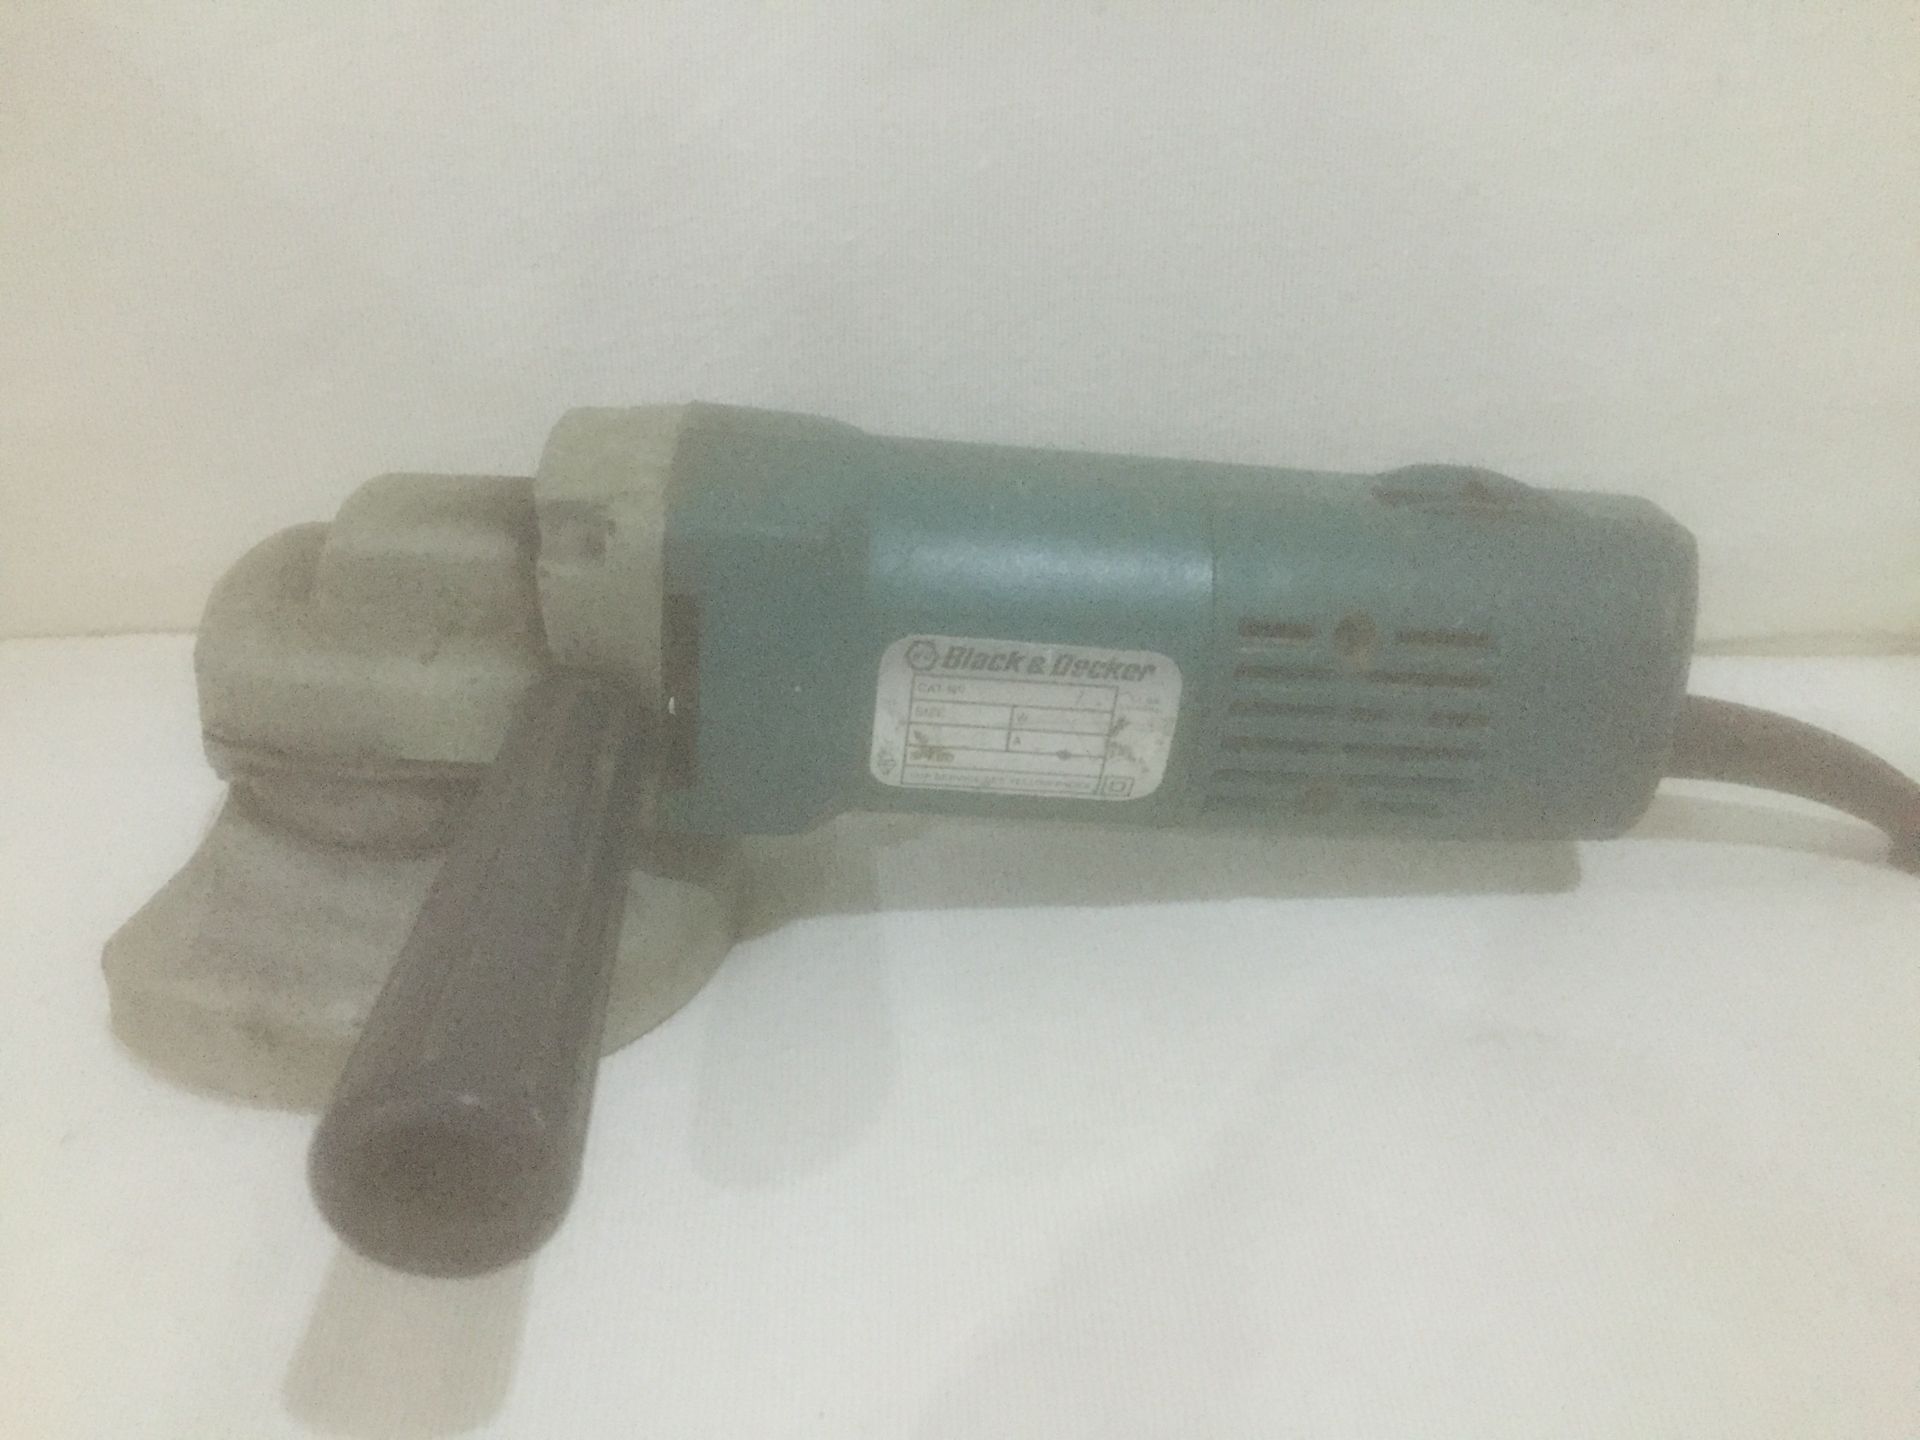 BLACK AND DECKER DN10 ANGLE GRINDER